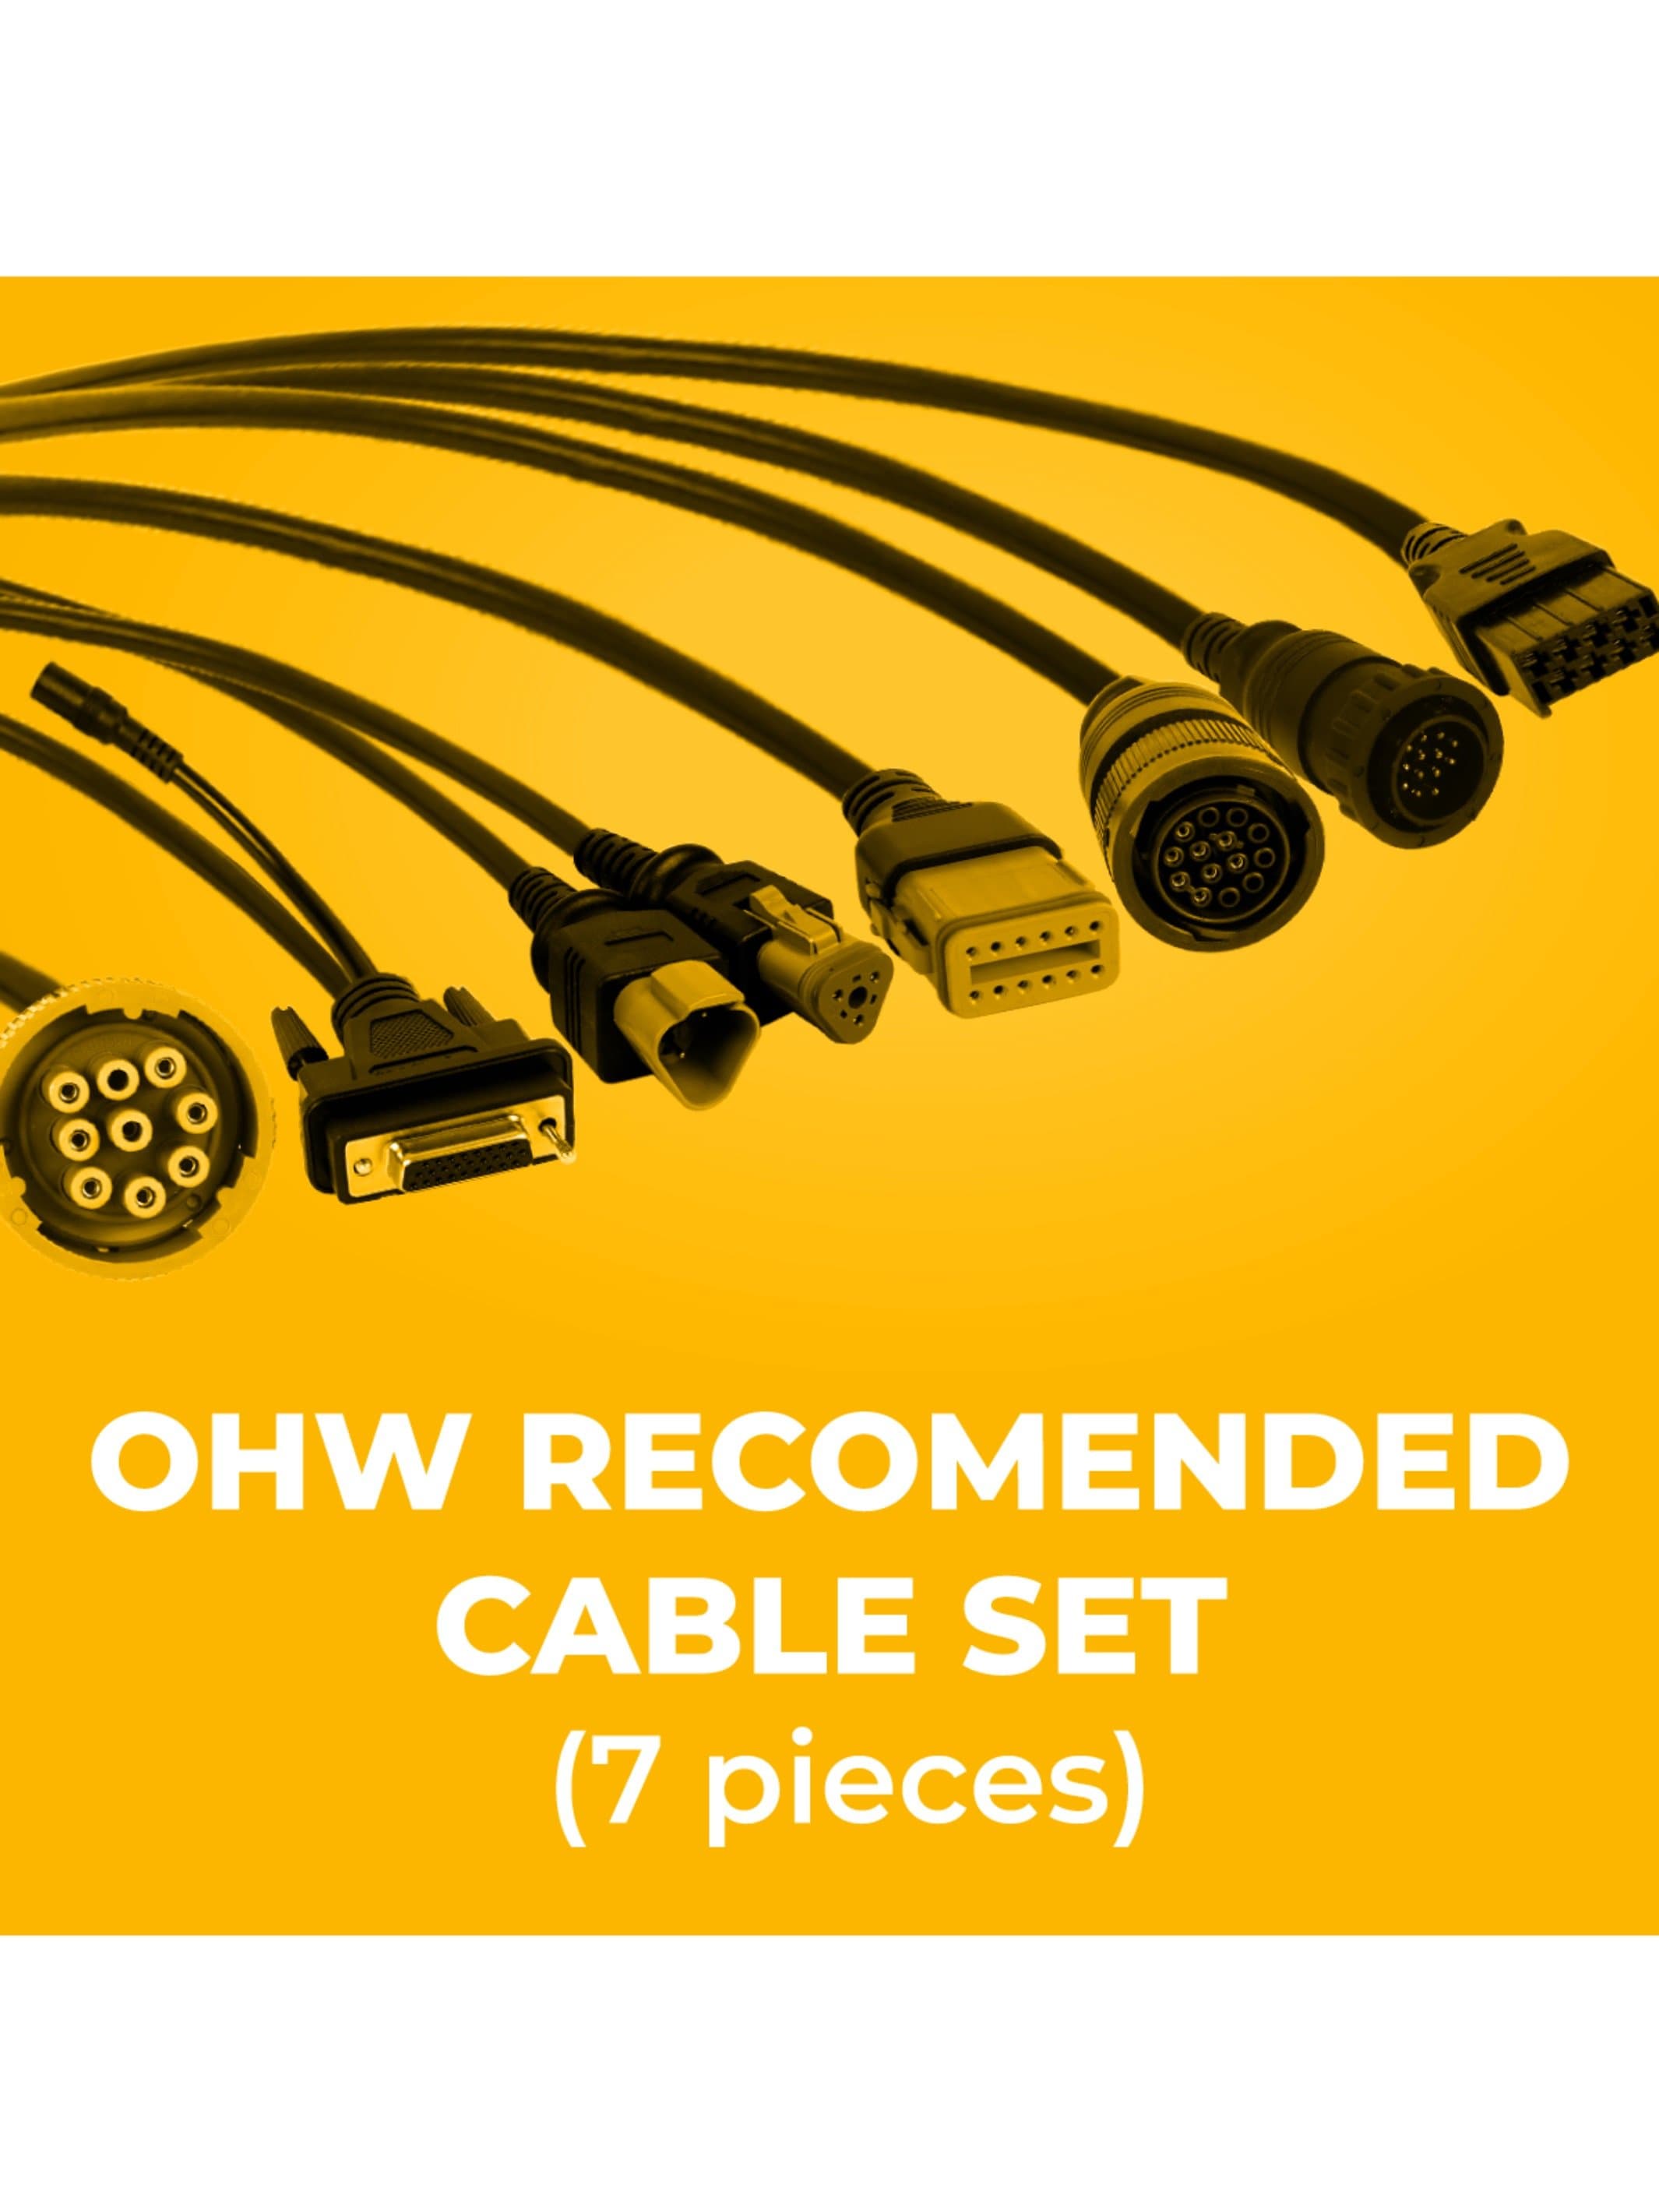 Jaltest Construction & Off Highway Equipment OHW Diagnostic Cable Kit